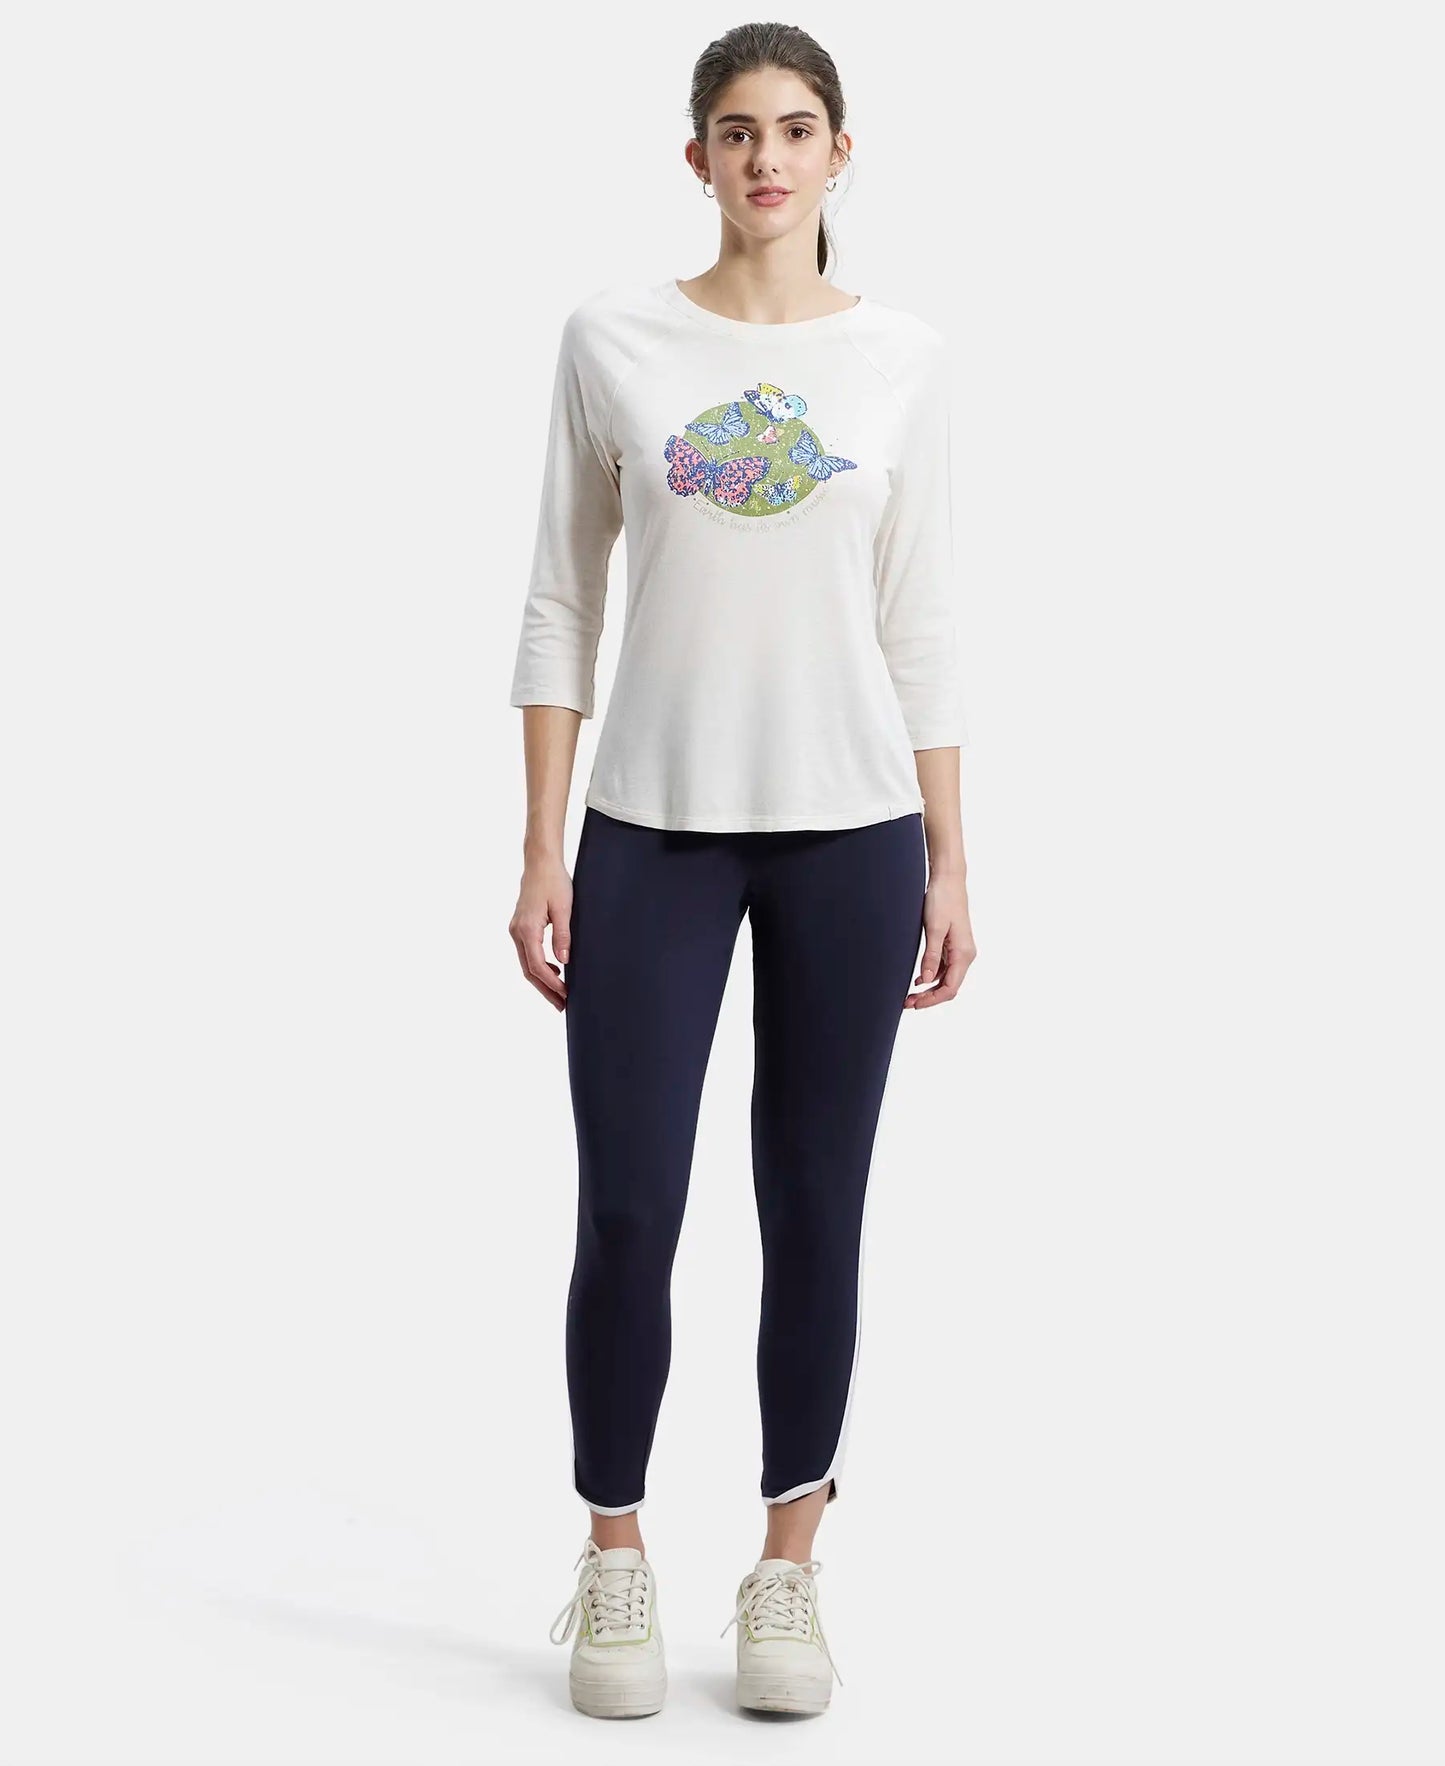 Micro Modal Cotton Relaxed Fit Graphic Printed Round Neck Three Quarter Sleeve T-Shirt - Ecru Melange-4